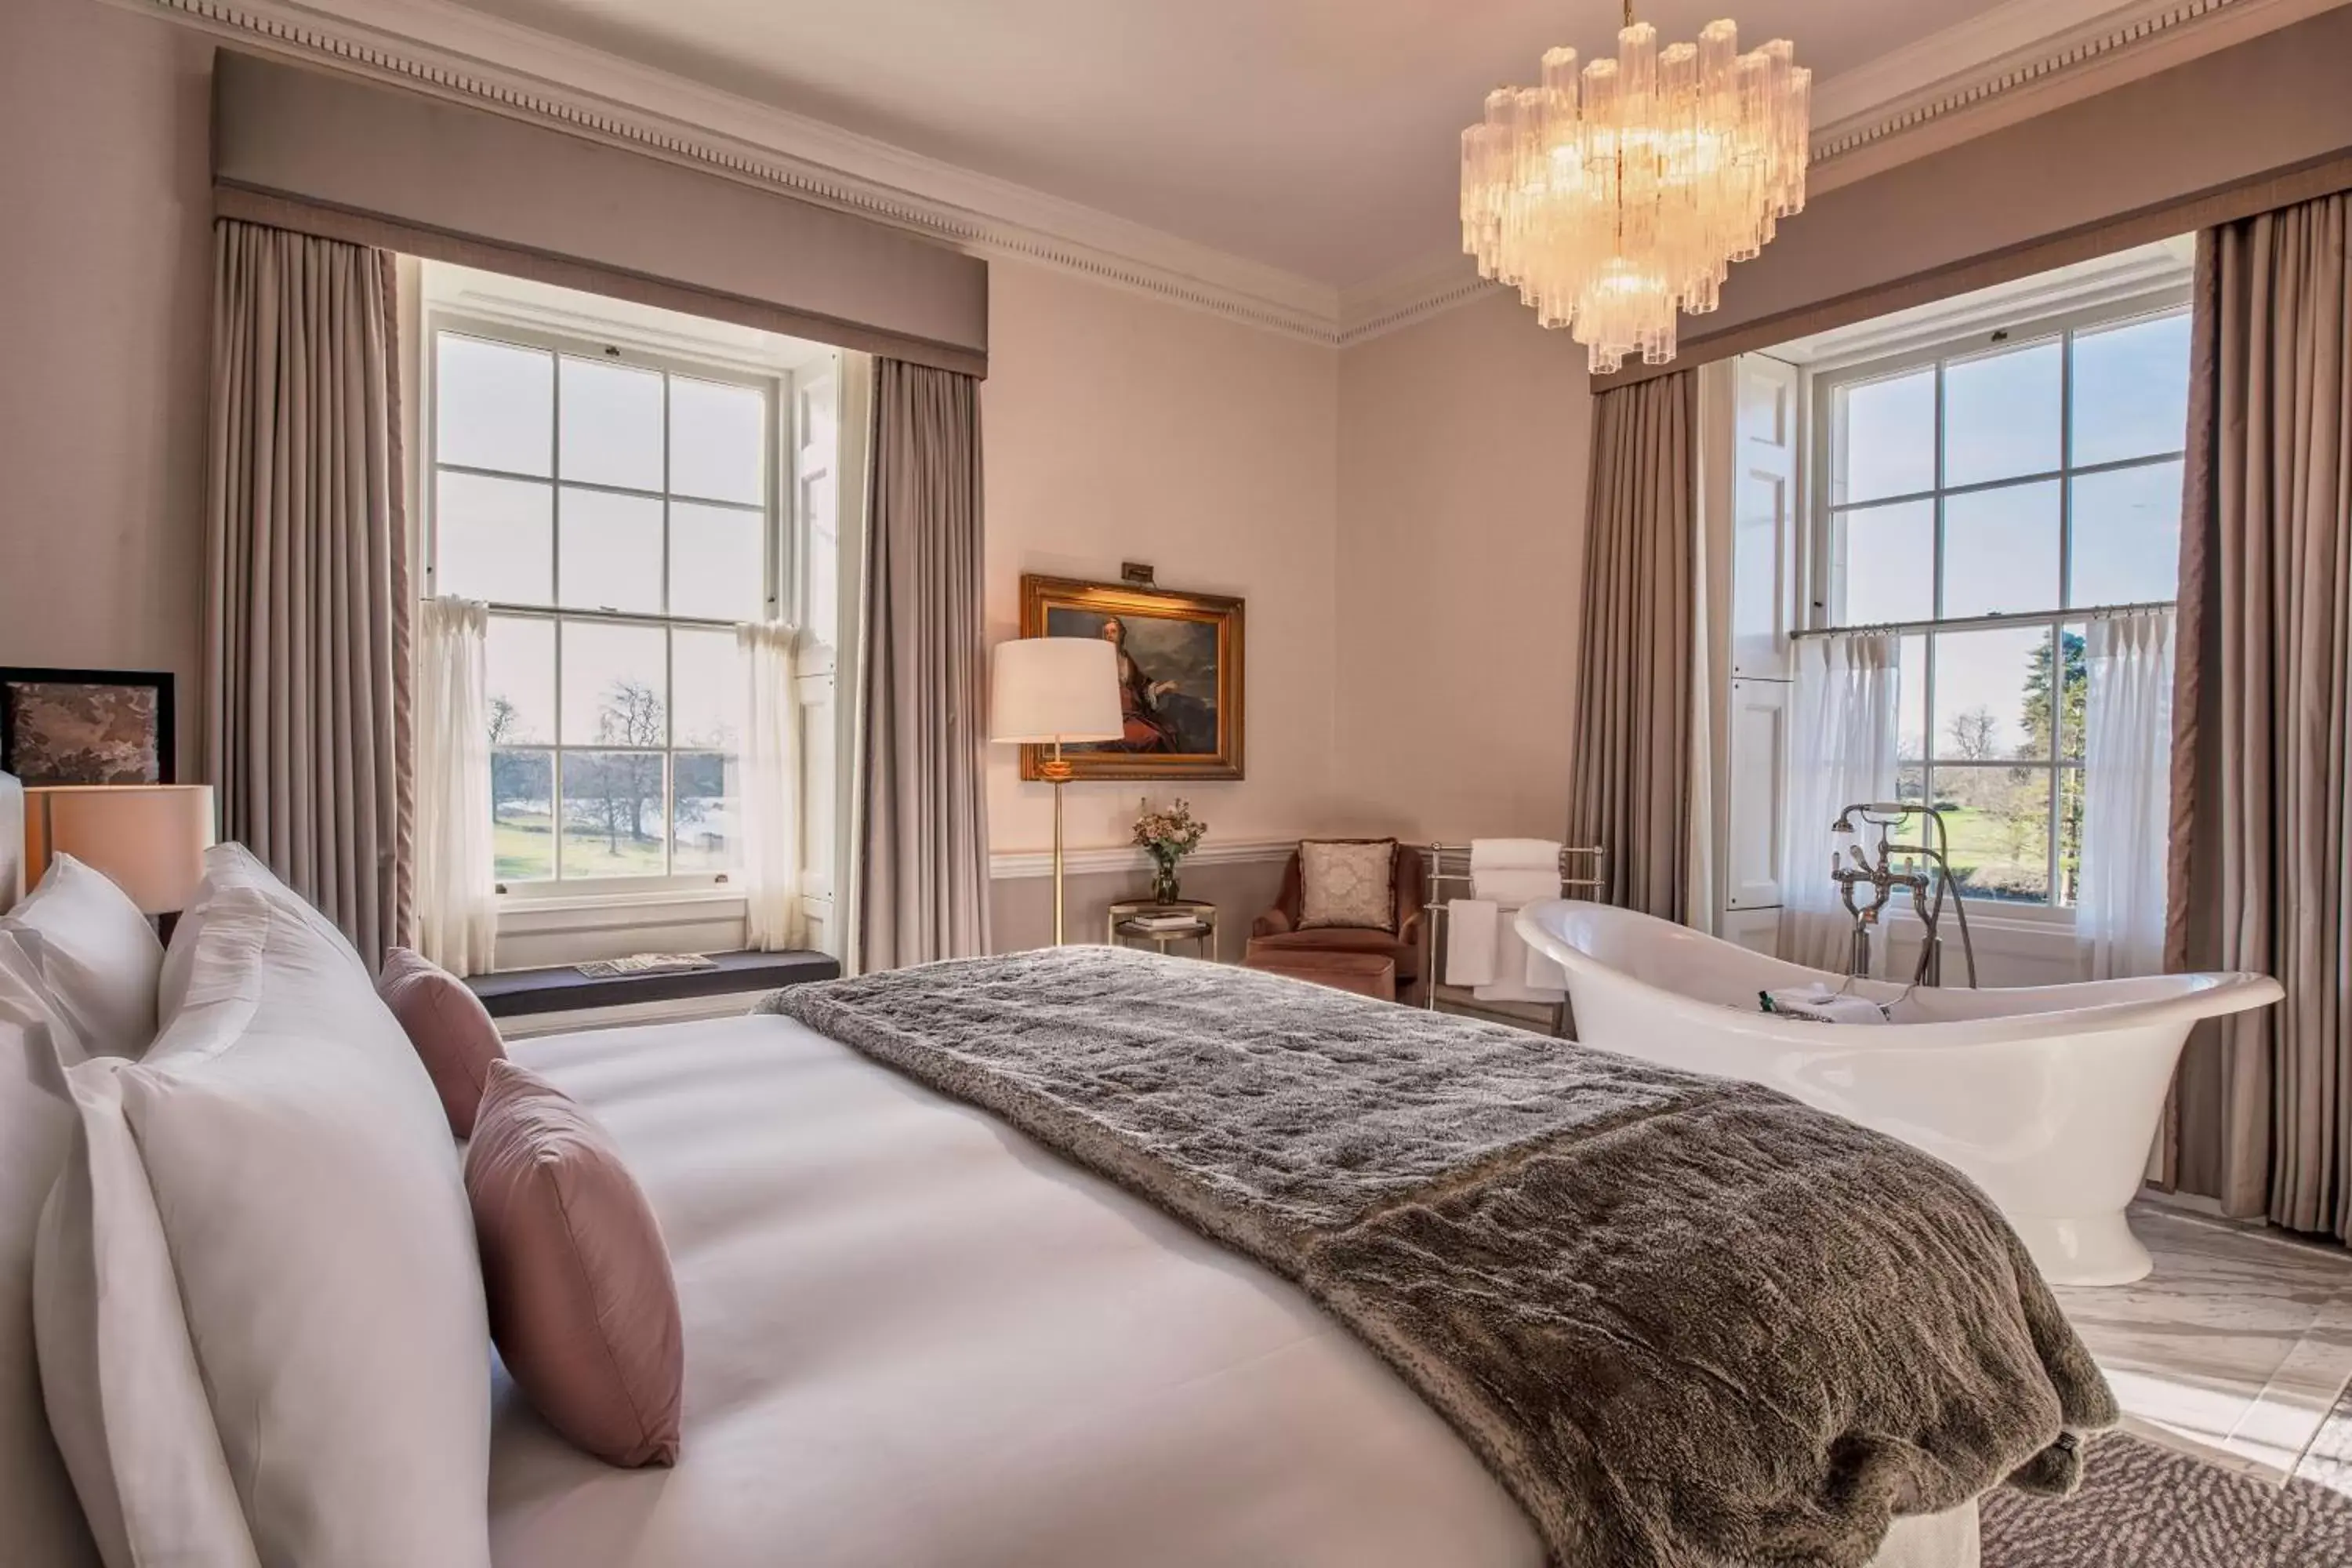 Bedroom, View in The Langley, a Luxury Collection Hotel, Buckinghamshire